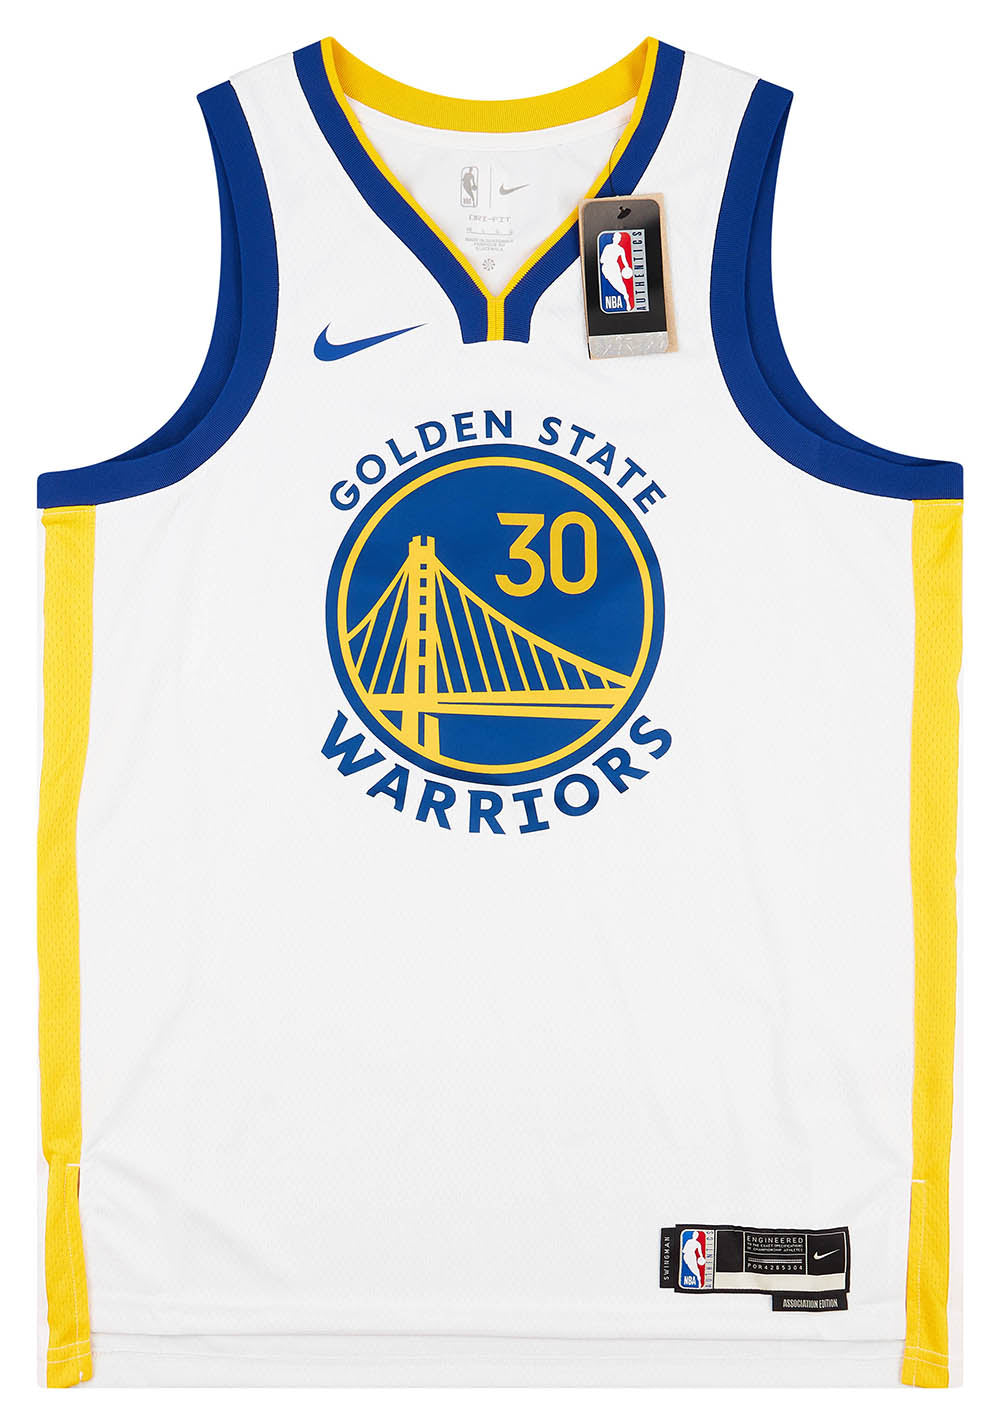 2017-23 GOLDEN STATE WARRIORS CURRY #30 NIKE SWINGMAN JERSEY (HOME) XL - W/TAGS